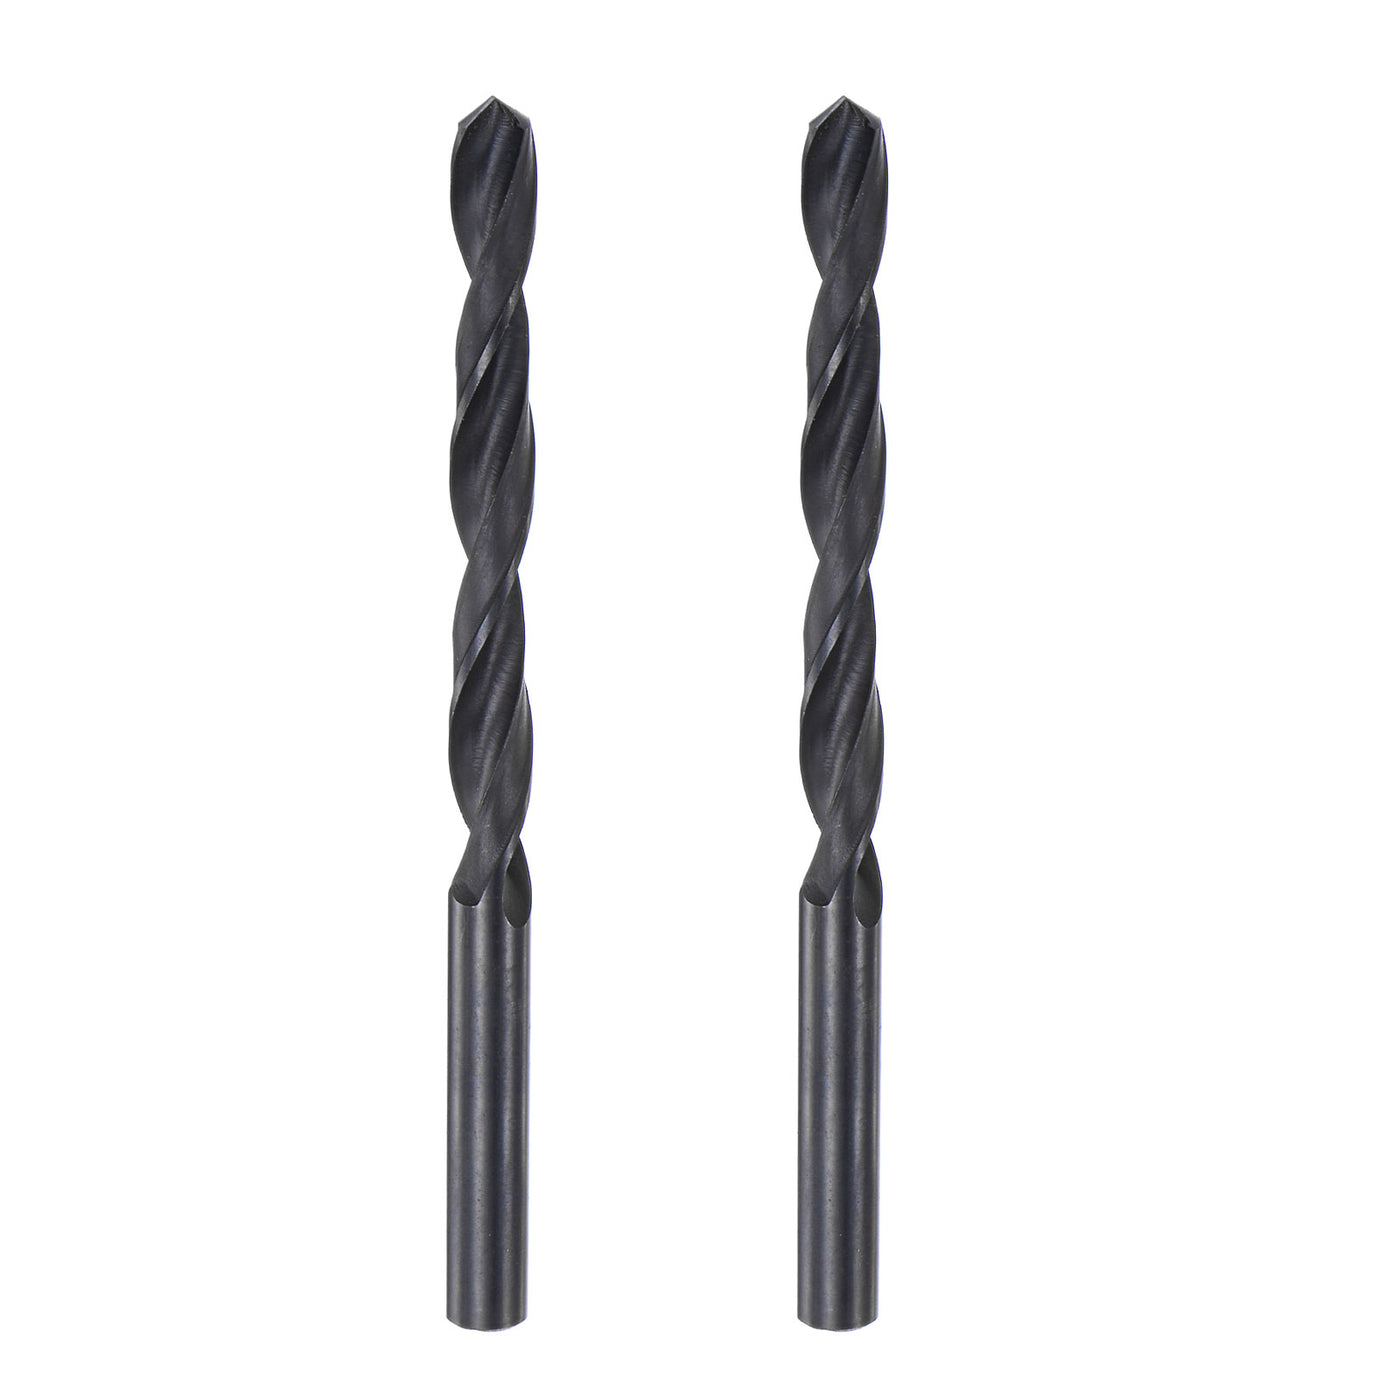 uxcell Uxcell High Speed Steel Twist Drill Bit, 7.4mm Fully Ground Black Oxide 108mm Long 2Pcs